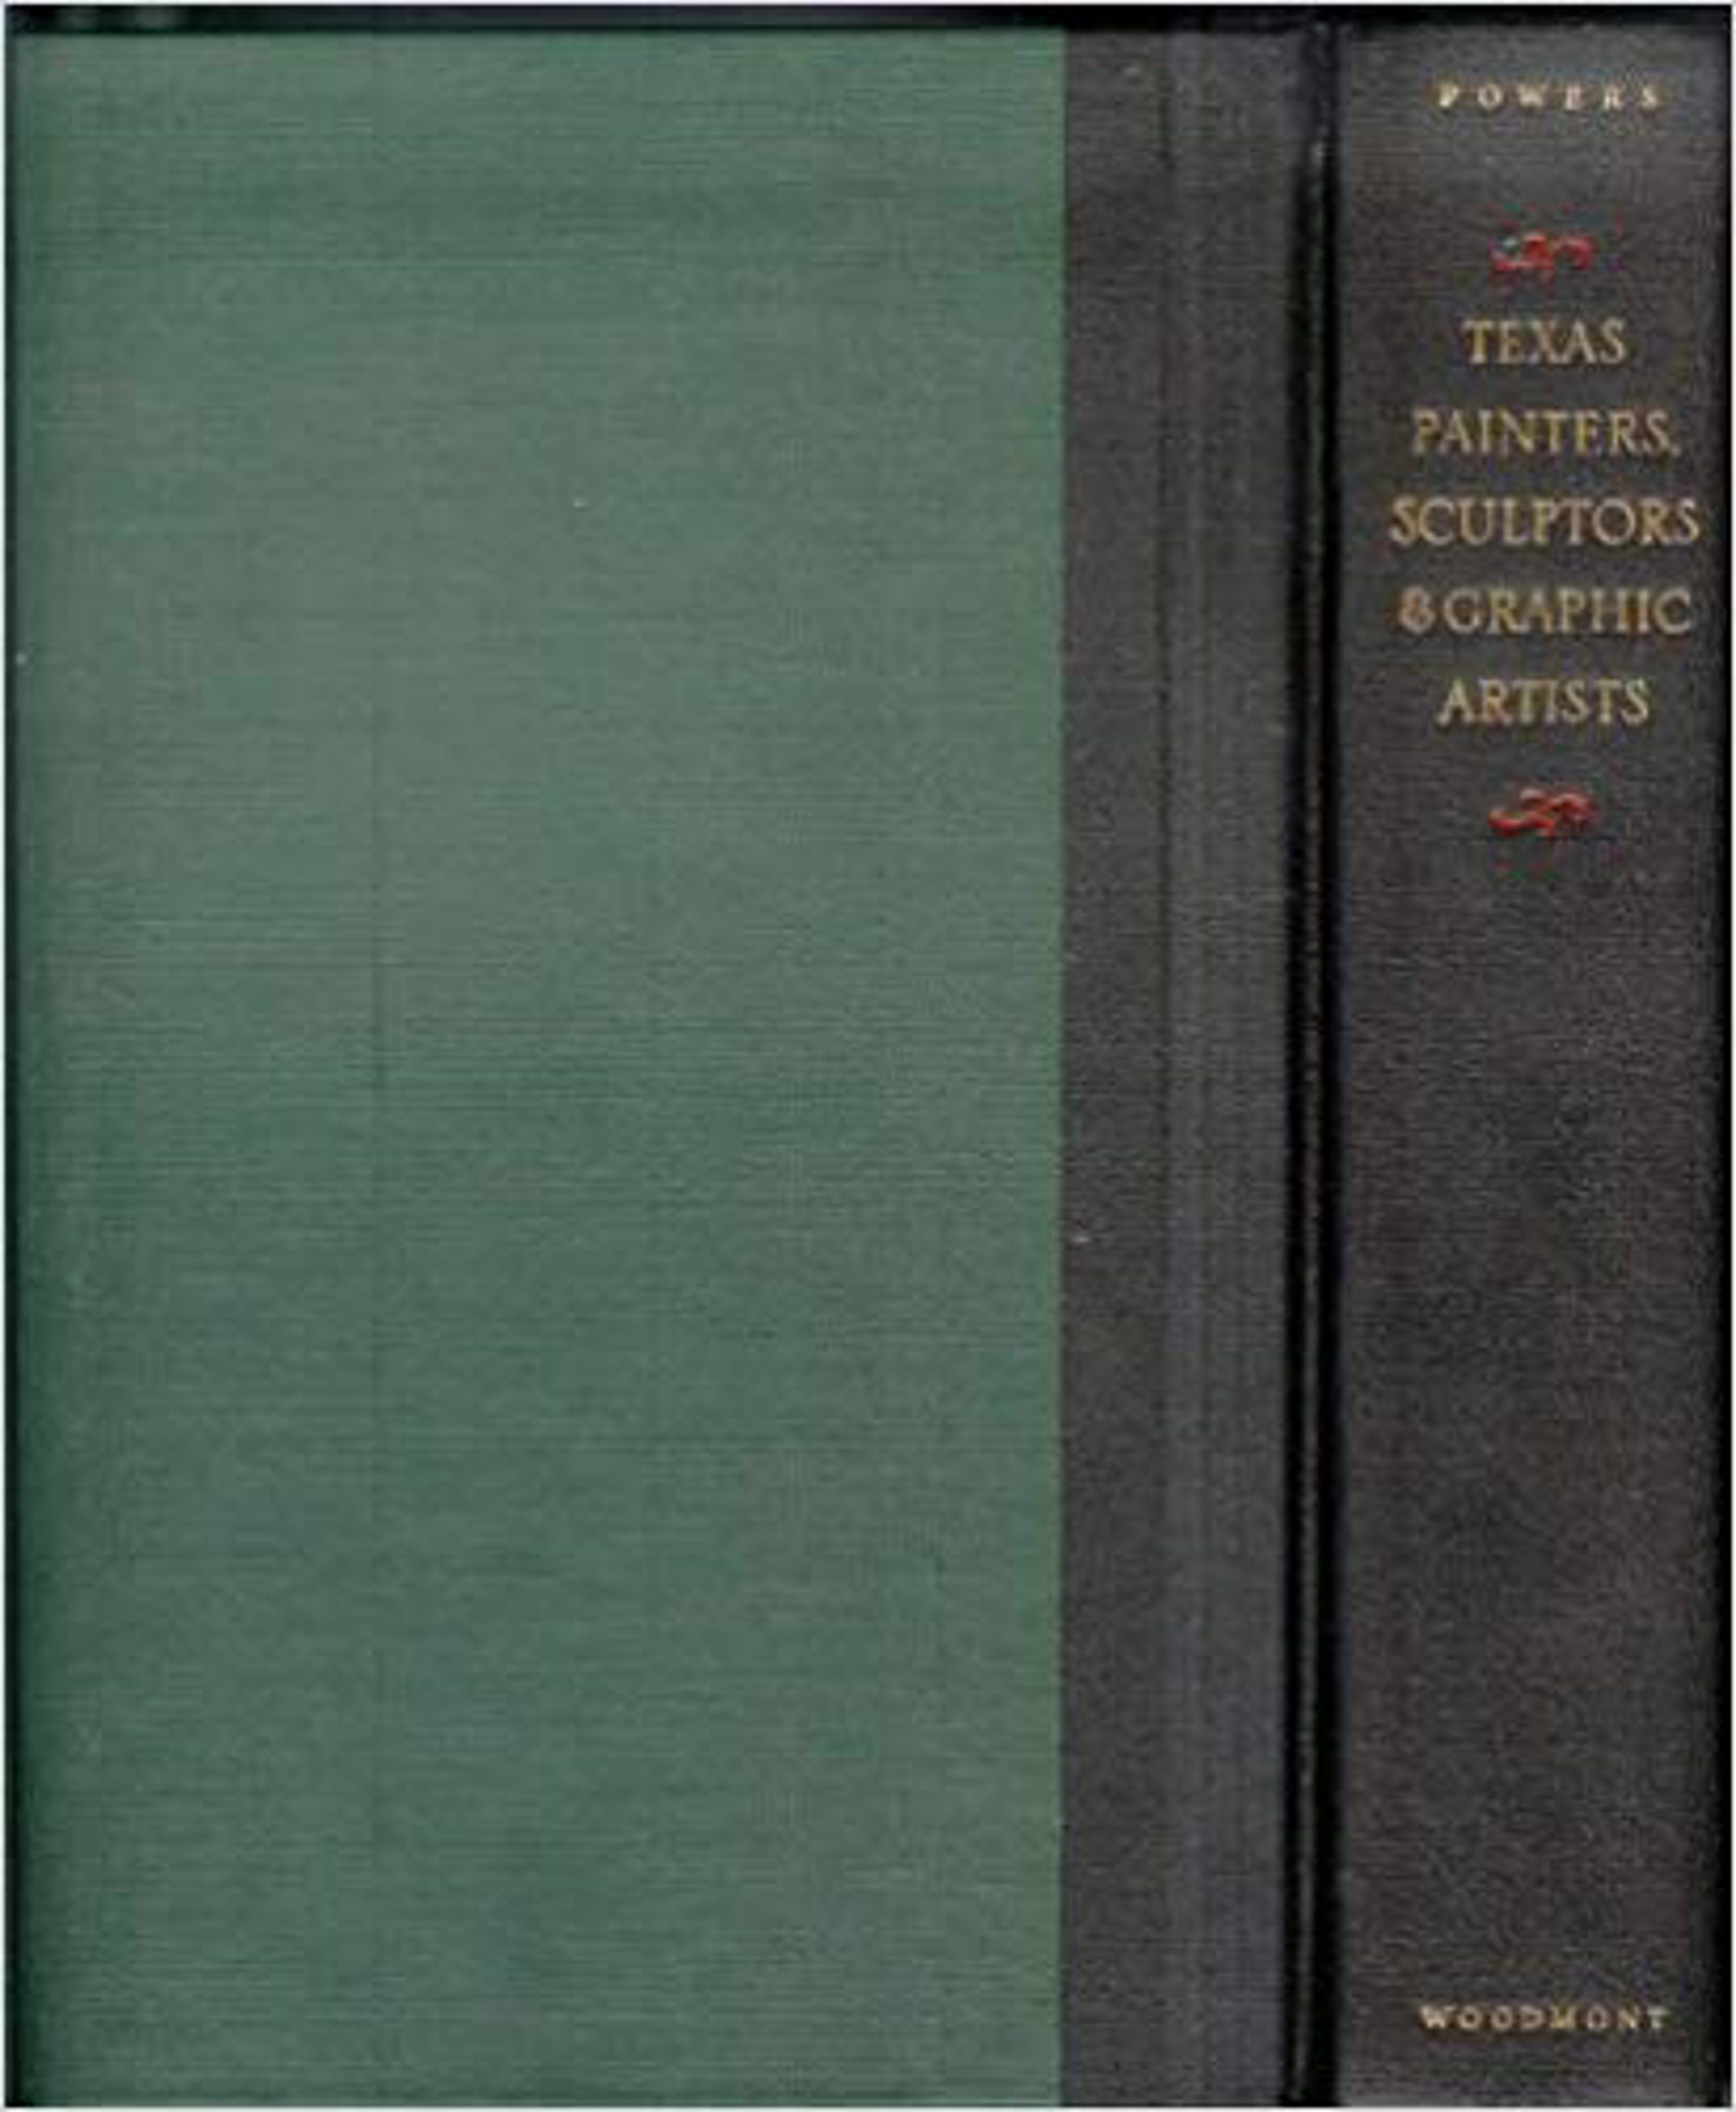 Texas Painters, Sculptors, & Graphic Artists in Texas Before 1942 by Publications